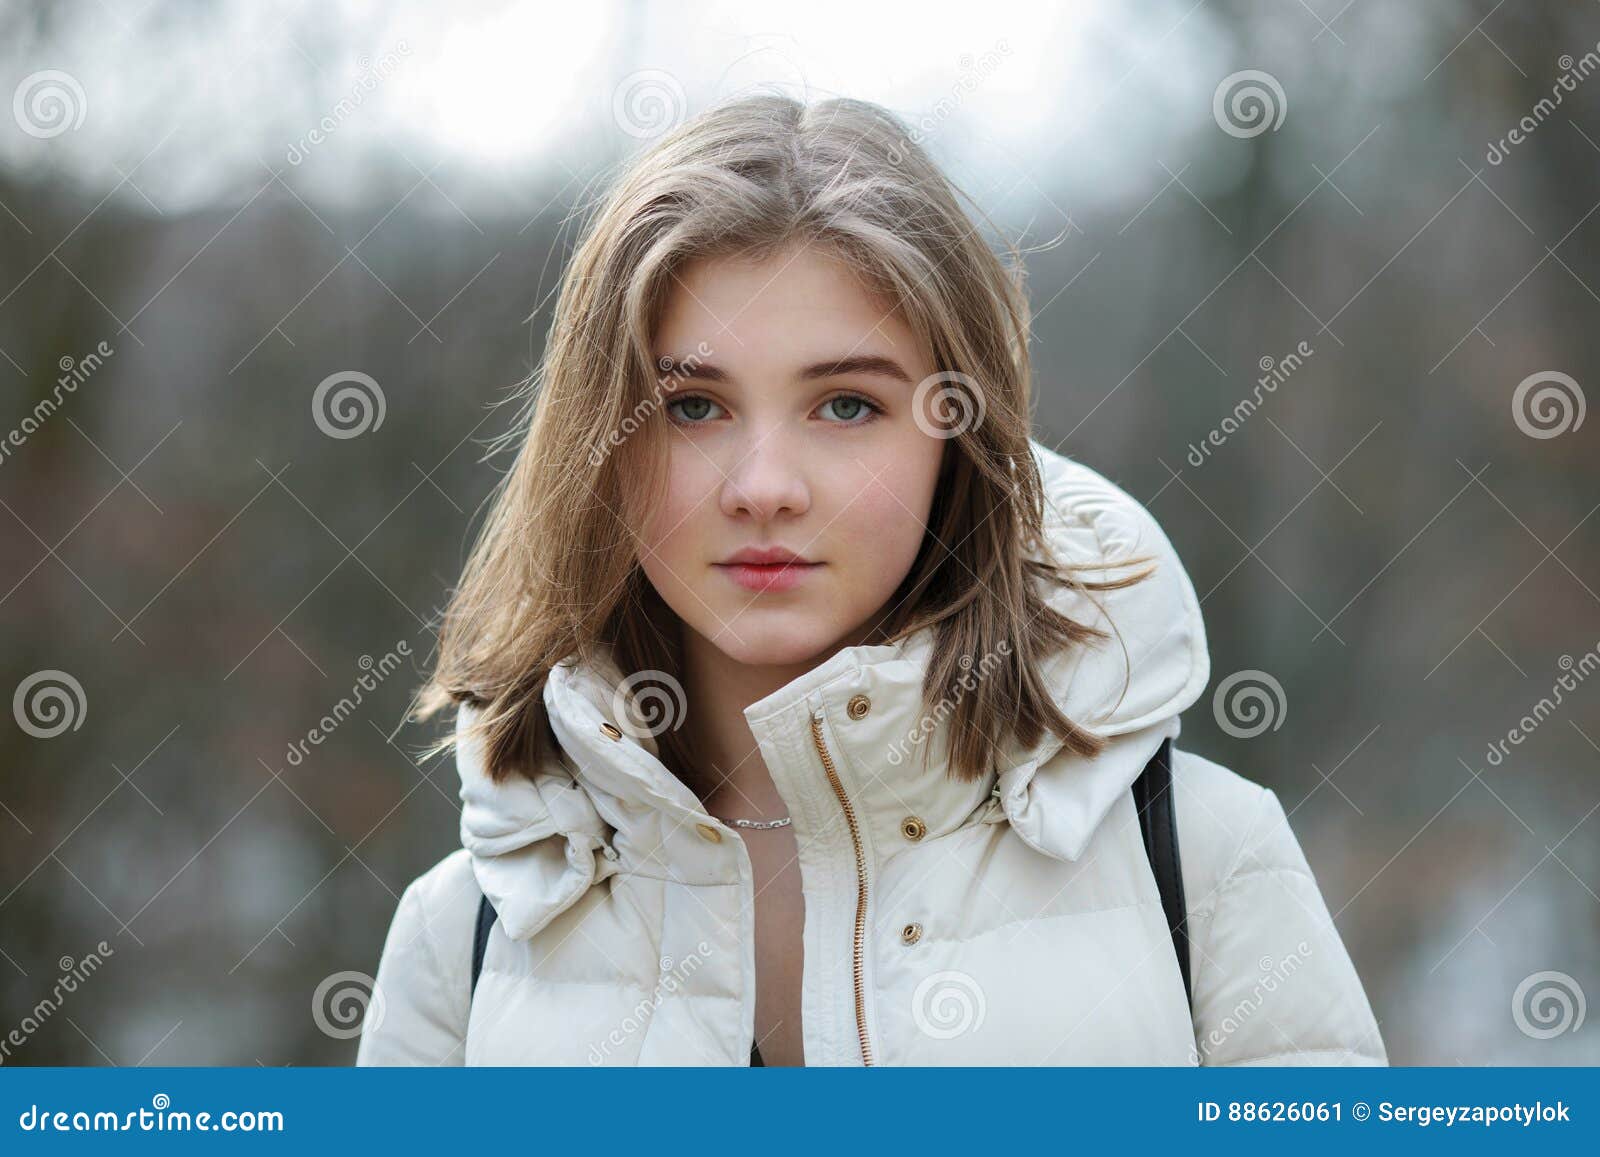 Headshot of Beautiful Young Natural Looking Blonde Woman Posing on the ...